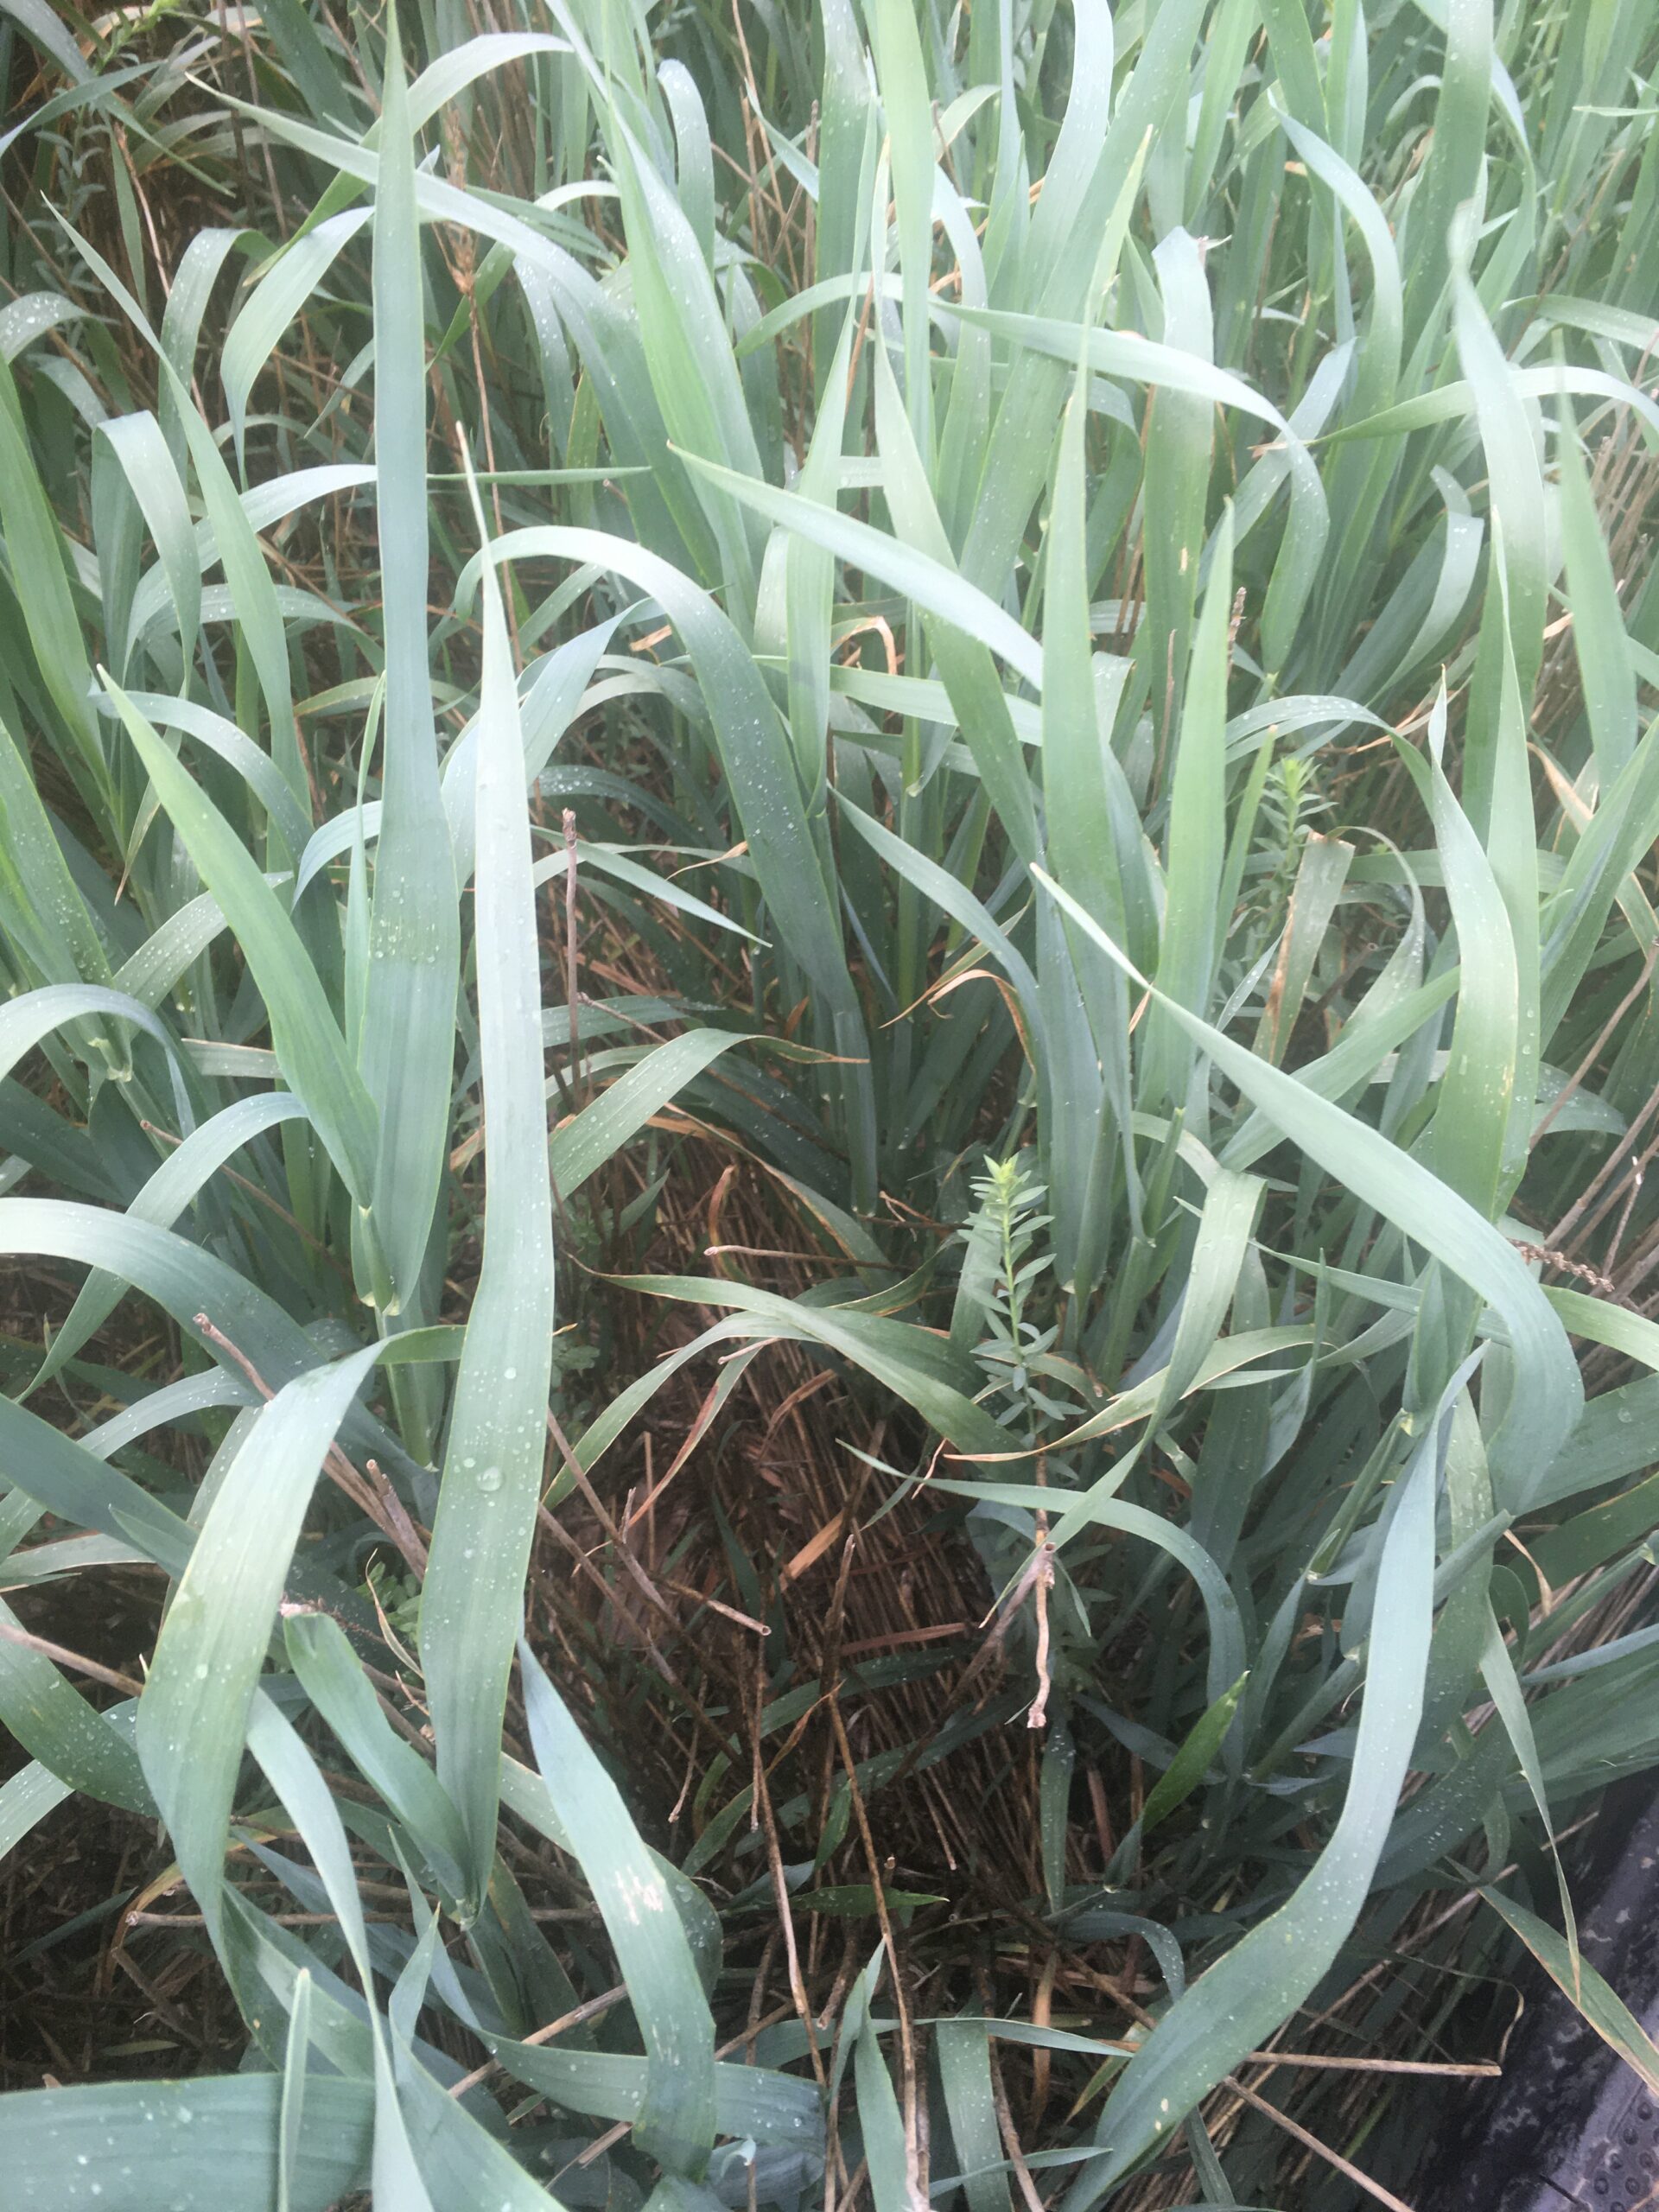 A closeup photo showing a cover crop consisting of several different species growing in wheat residue.